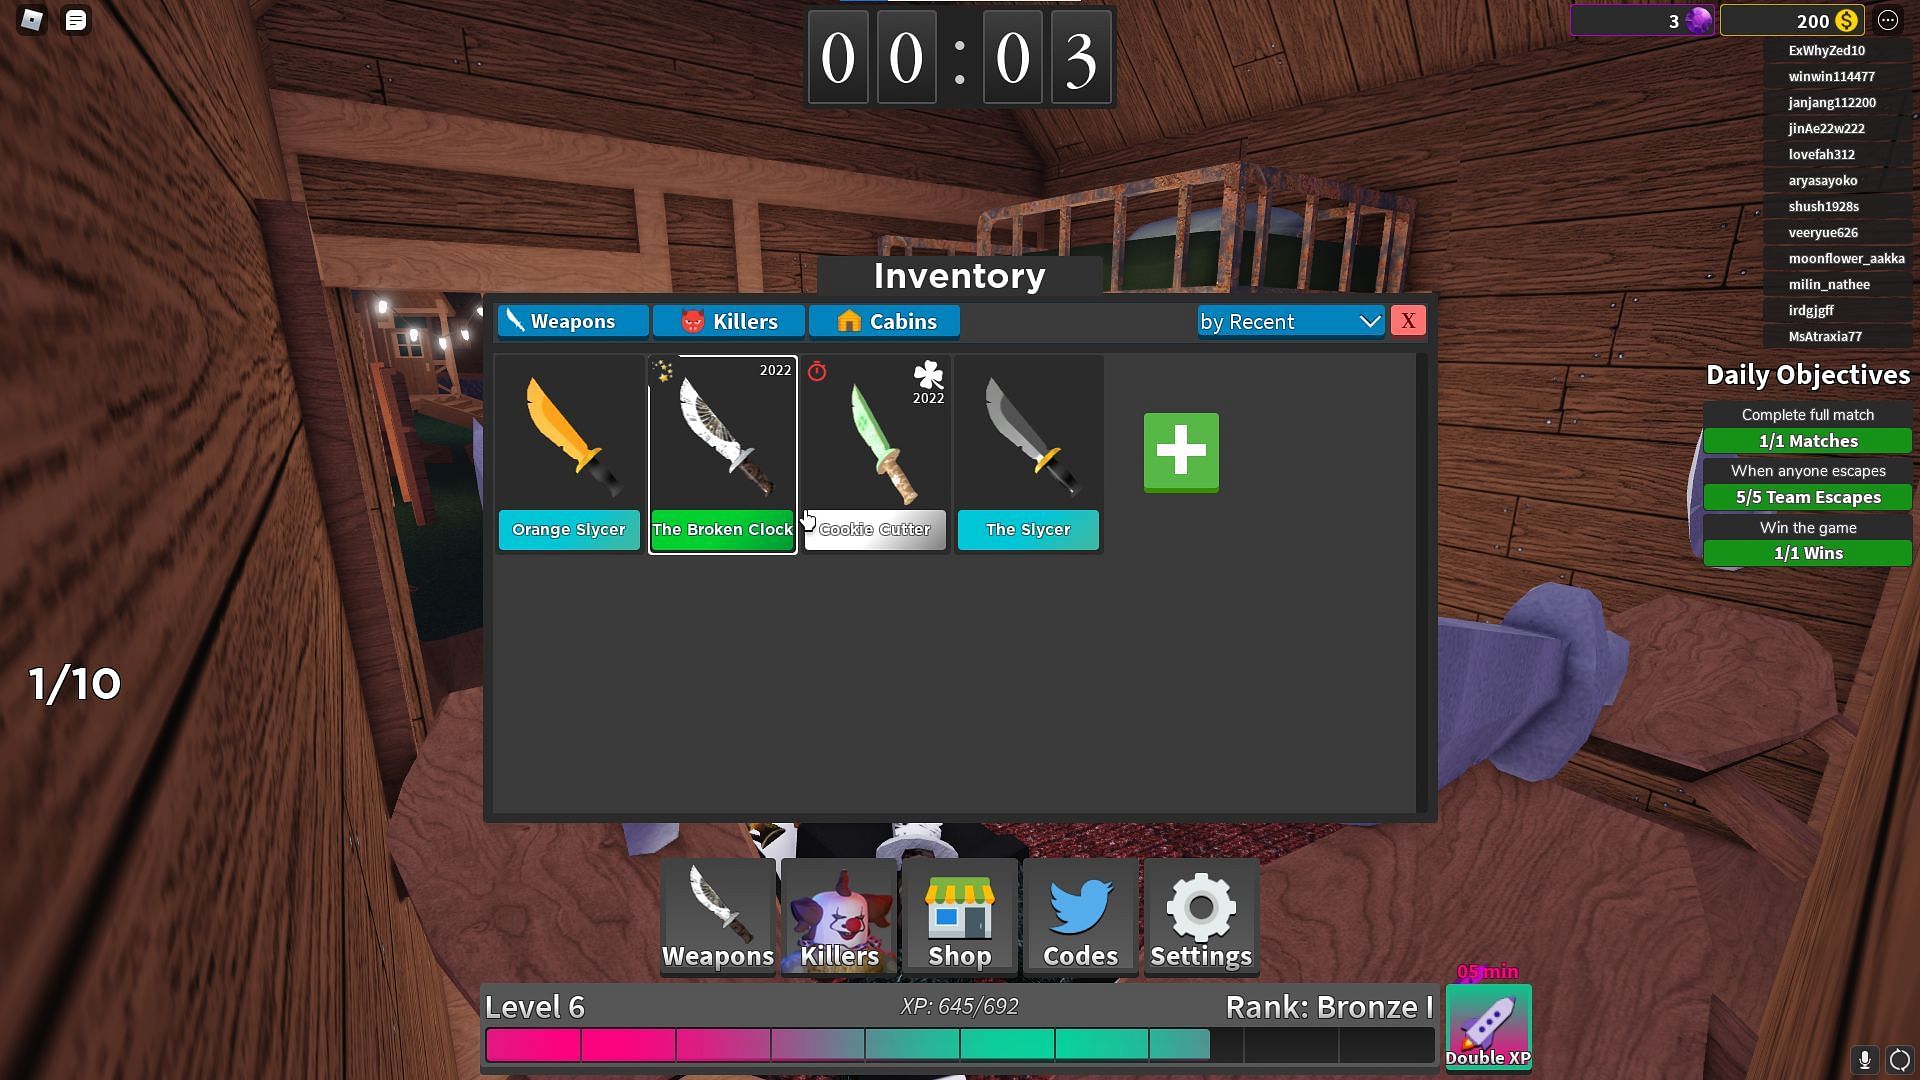 With the codes, users can claim Cookie Cutter Slycer and The Broken Clock knife (Image via Roblox)